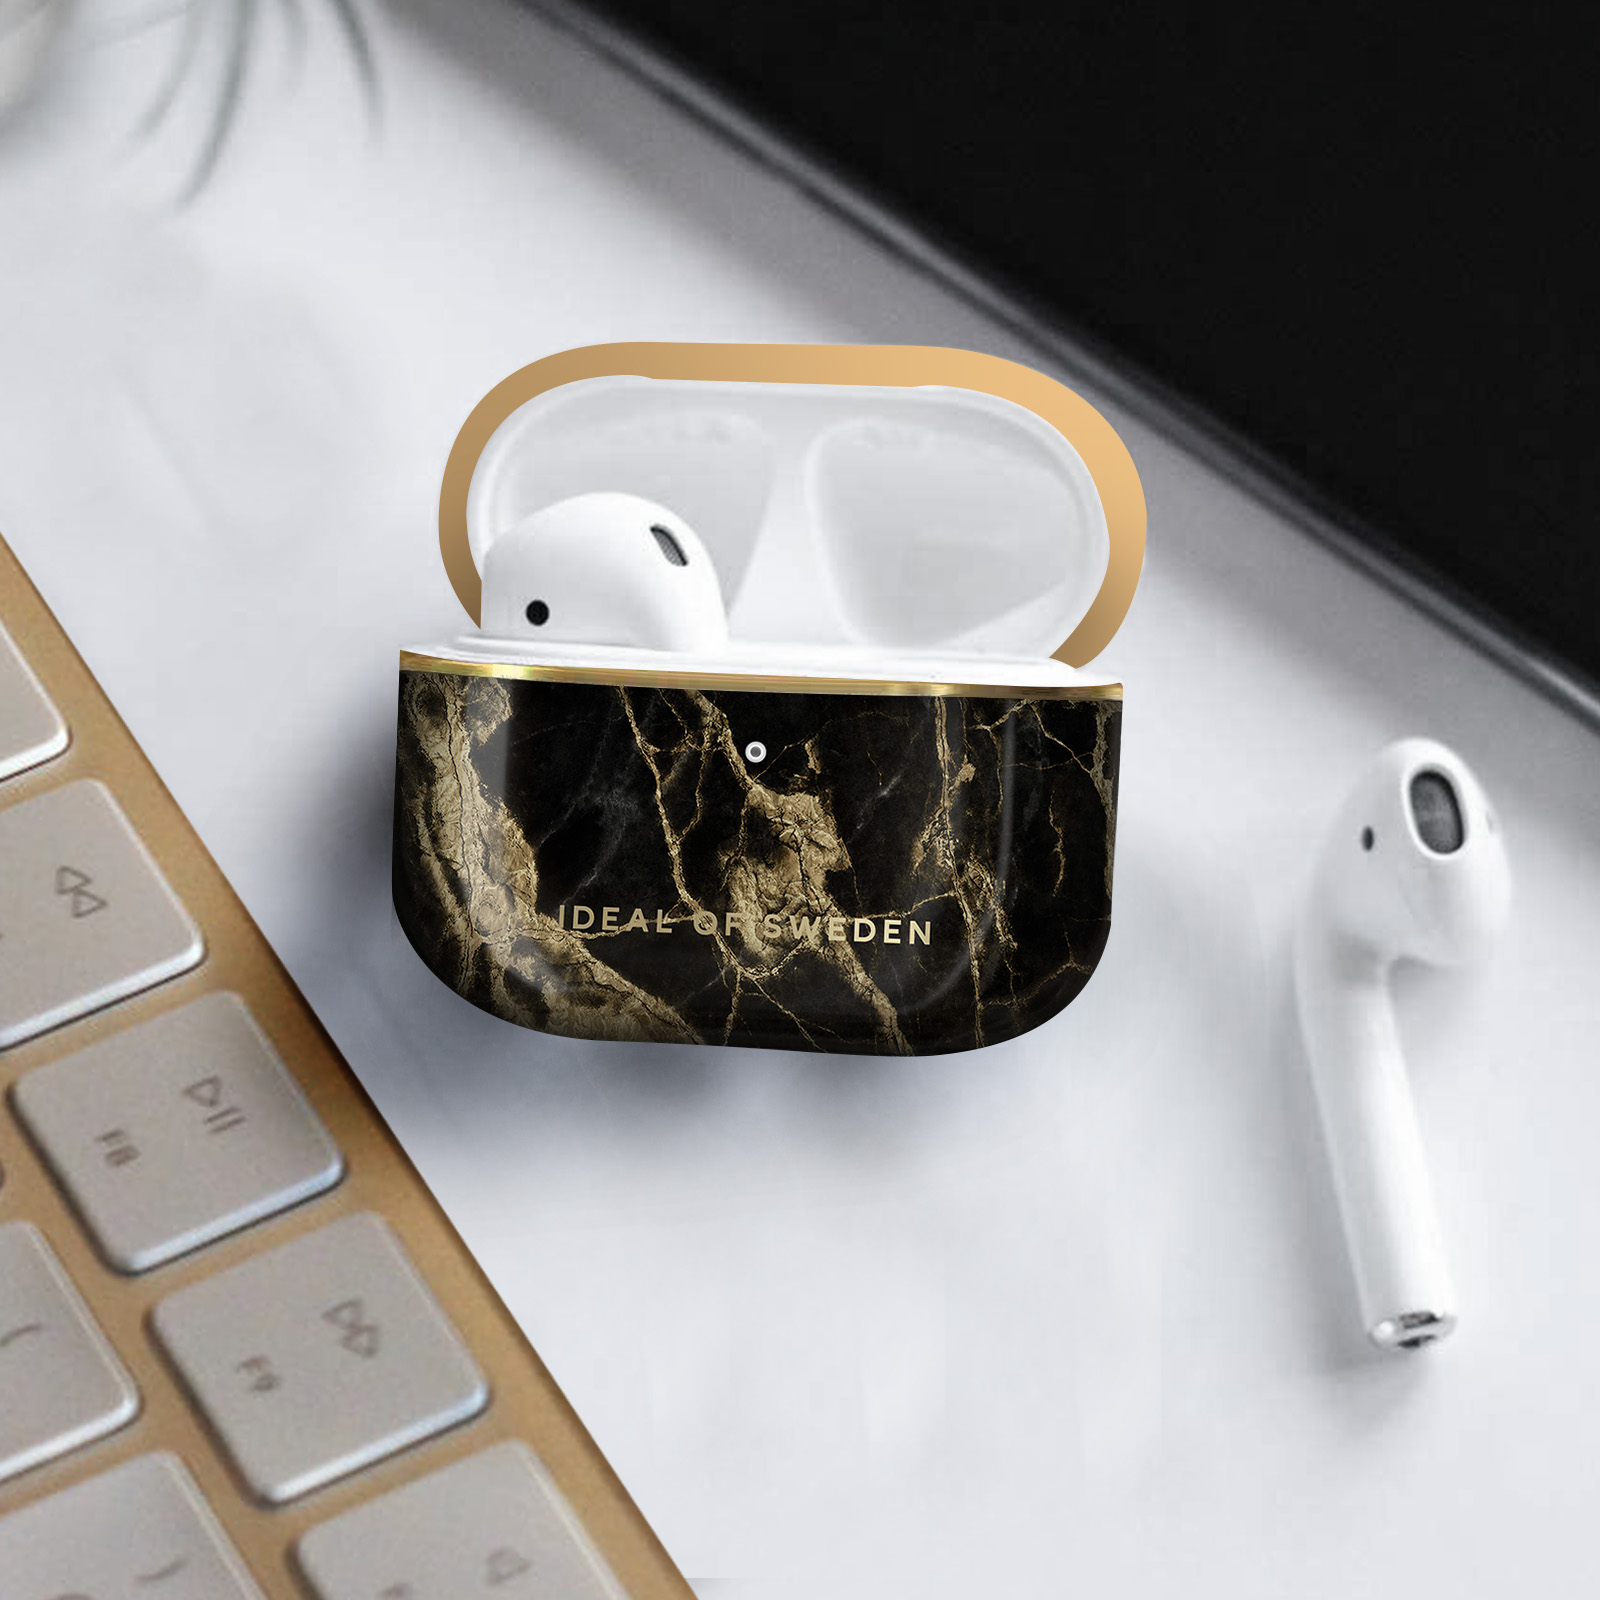 IDEAL OF SWEDEN Case Smoke Apple passend Golden Marble Cover IDFAPC-PRO-191 AirPod Full für